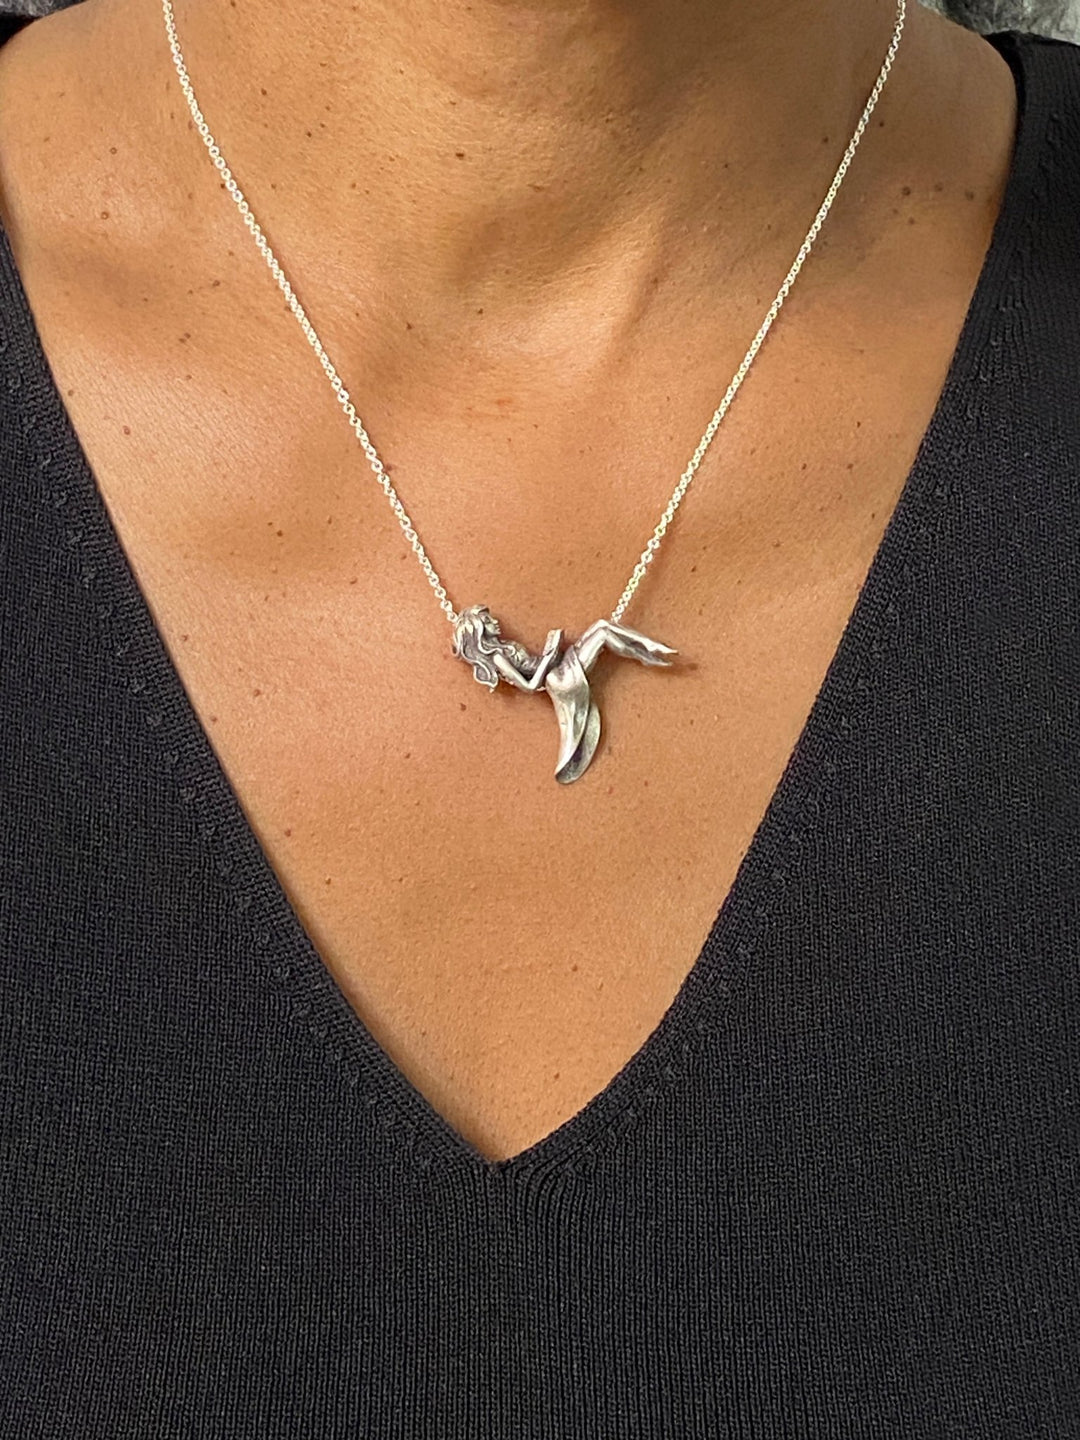 Woman wearing ’The Reader’ Sterling Silver Book Pendant and Necklace - Perfect for Book Lovers!